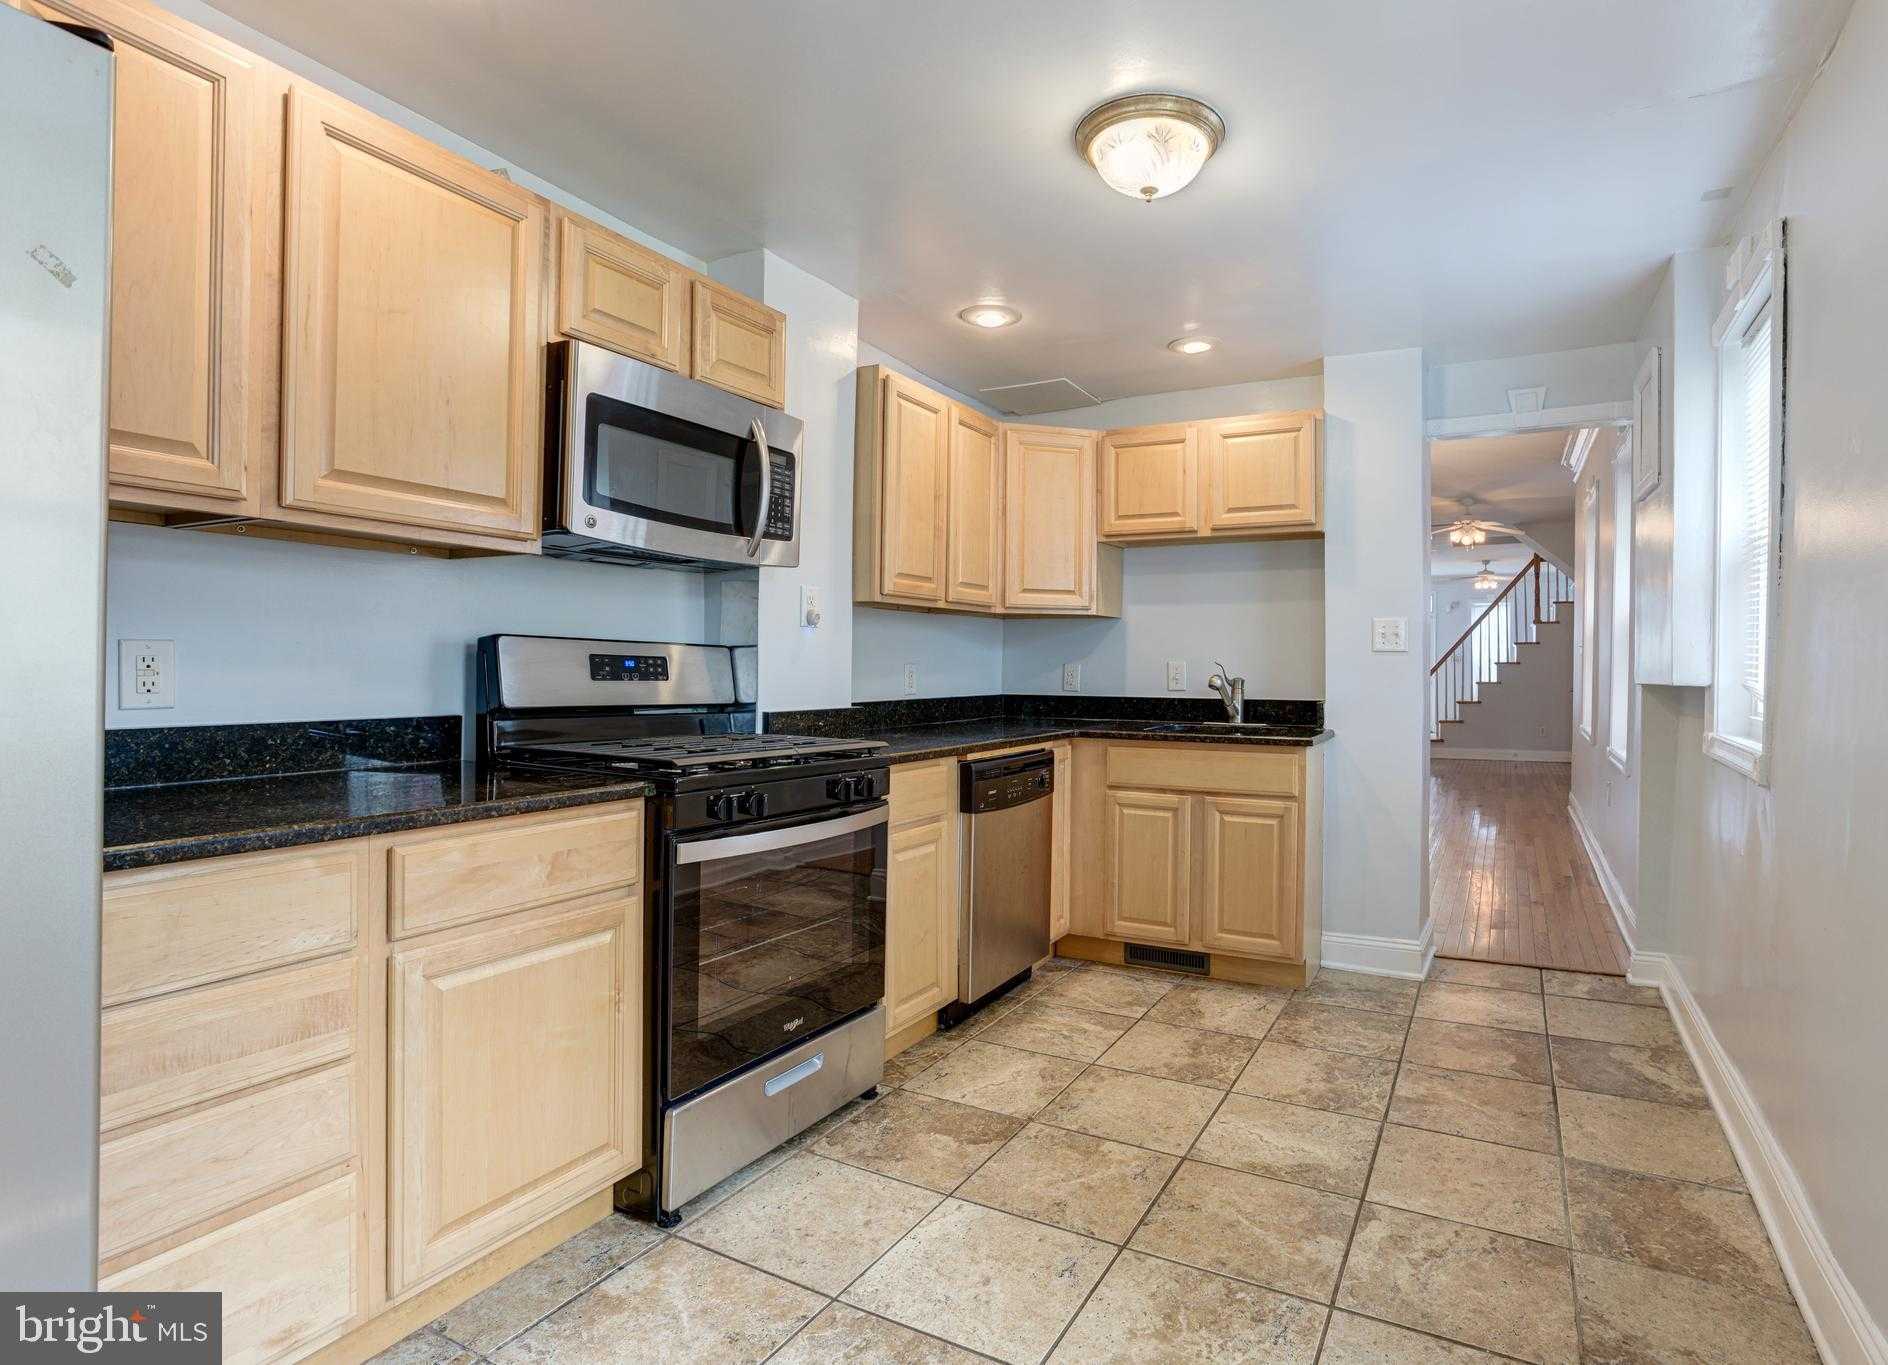 View BALTIMORE, MD 21230 townhome